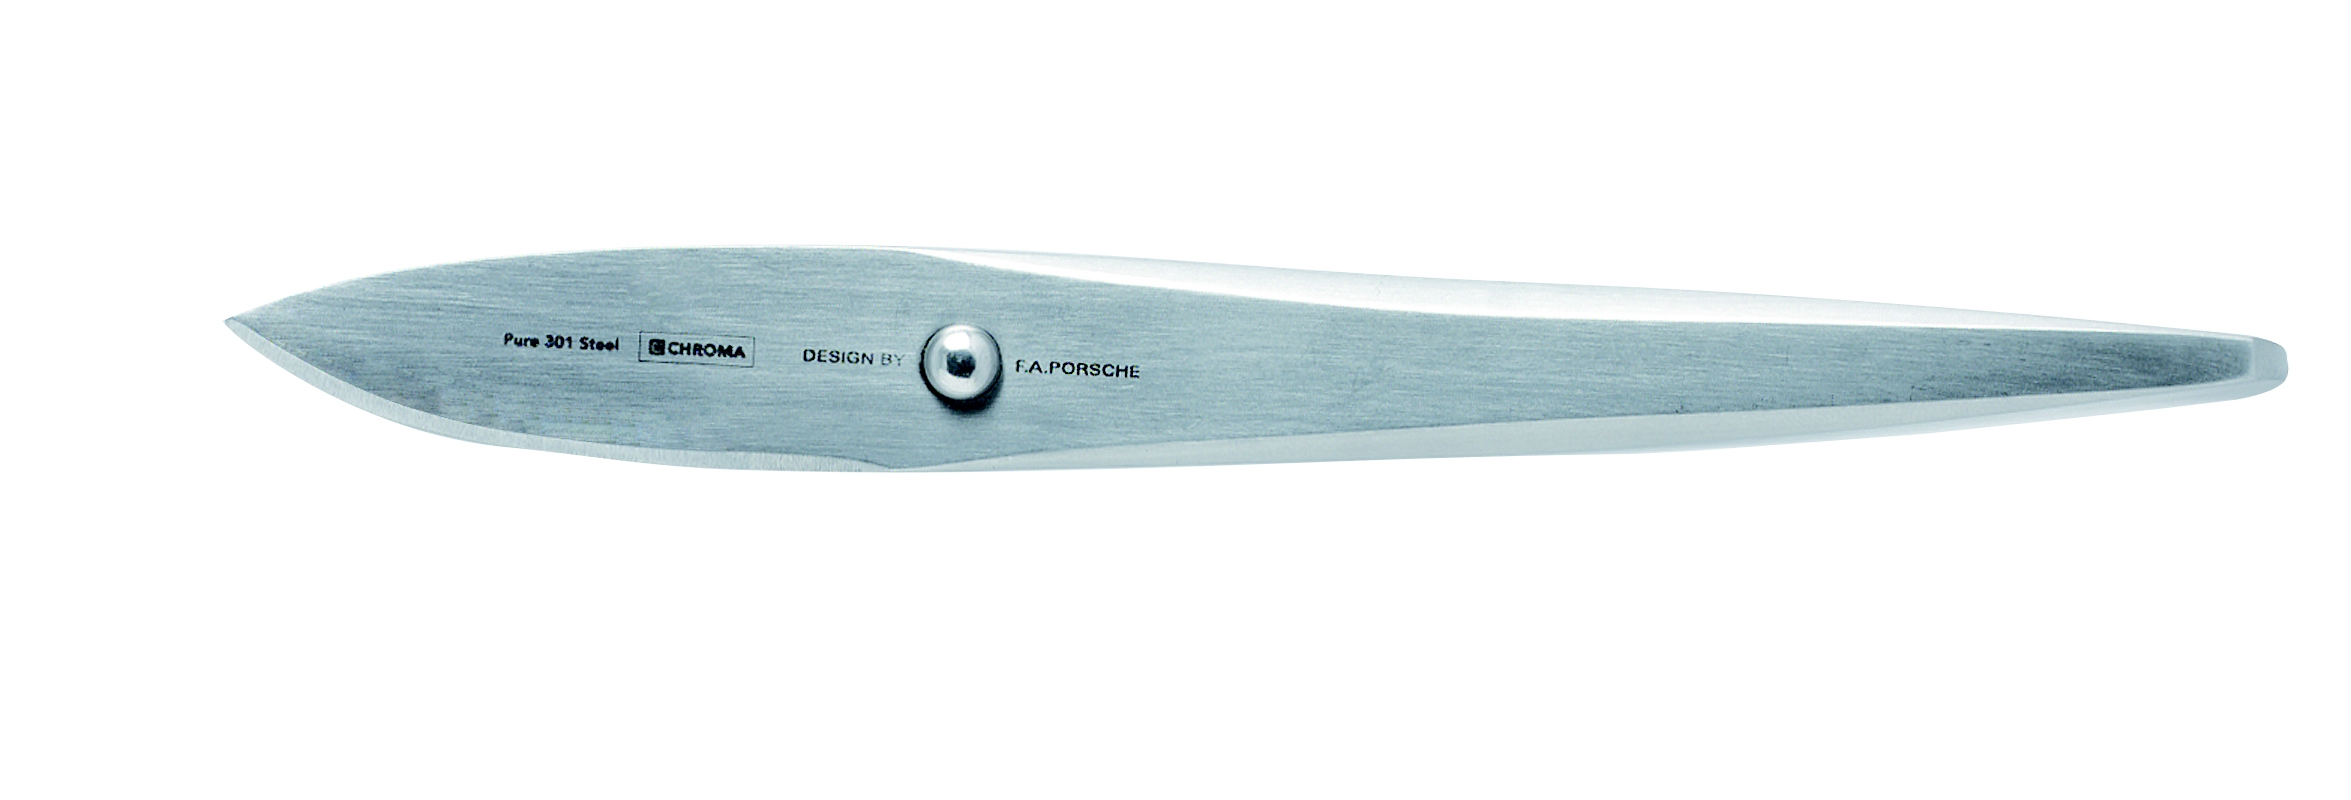 P-24 CHROMA type 301 oyster knife